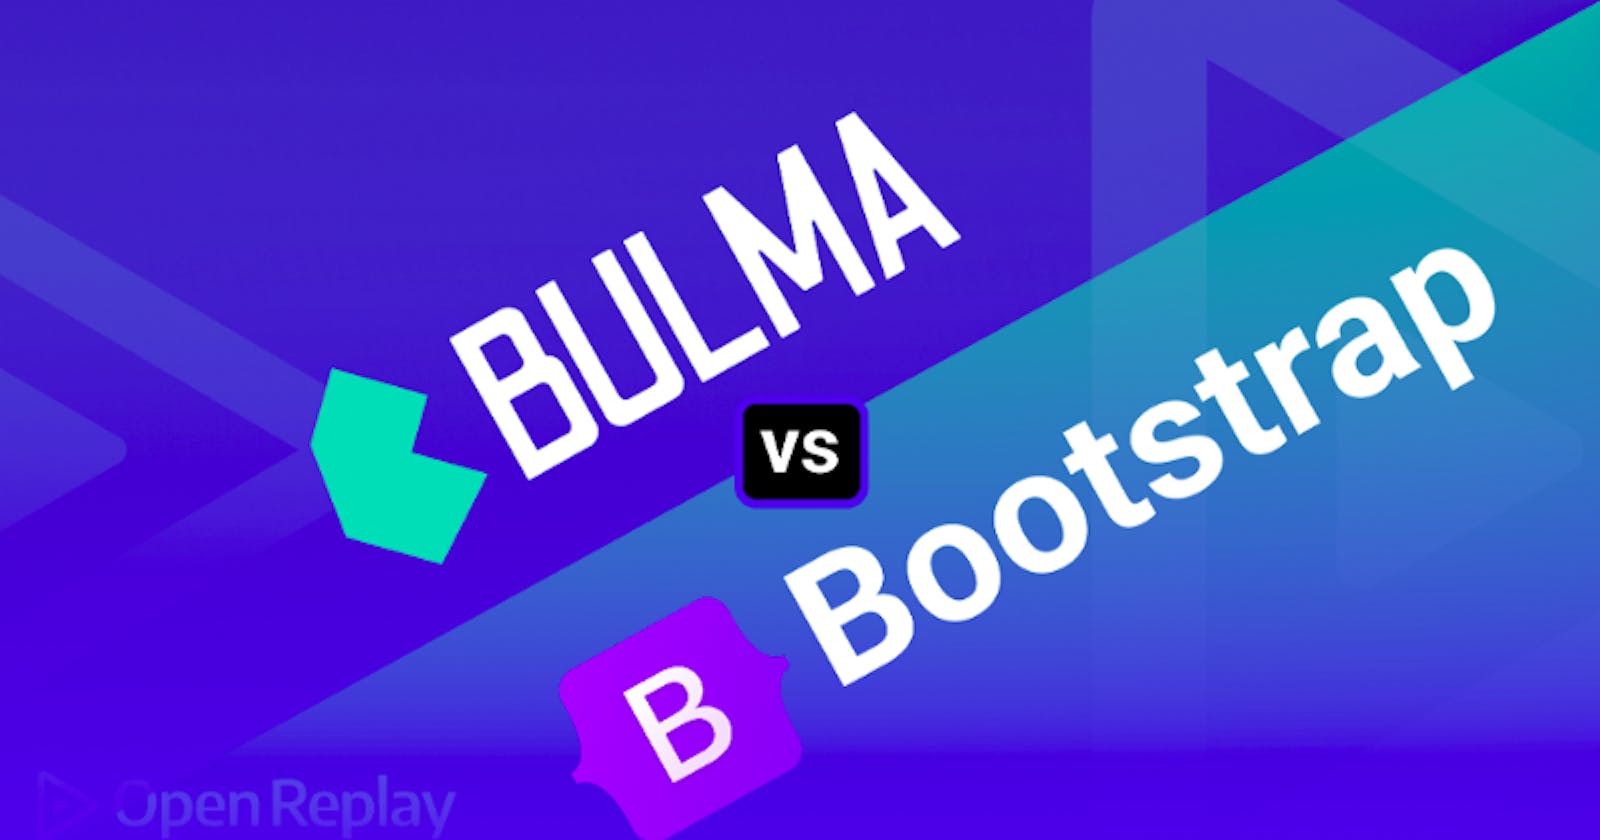 Bulma vs. Boostrap — What are their differences?